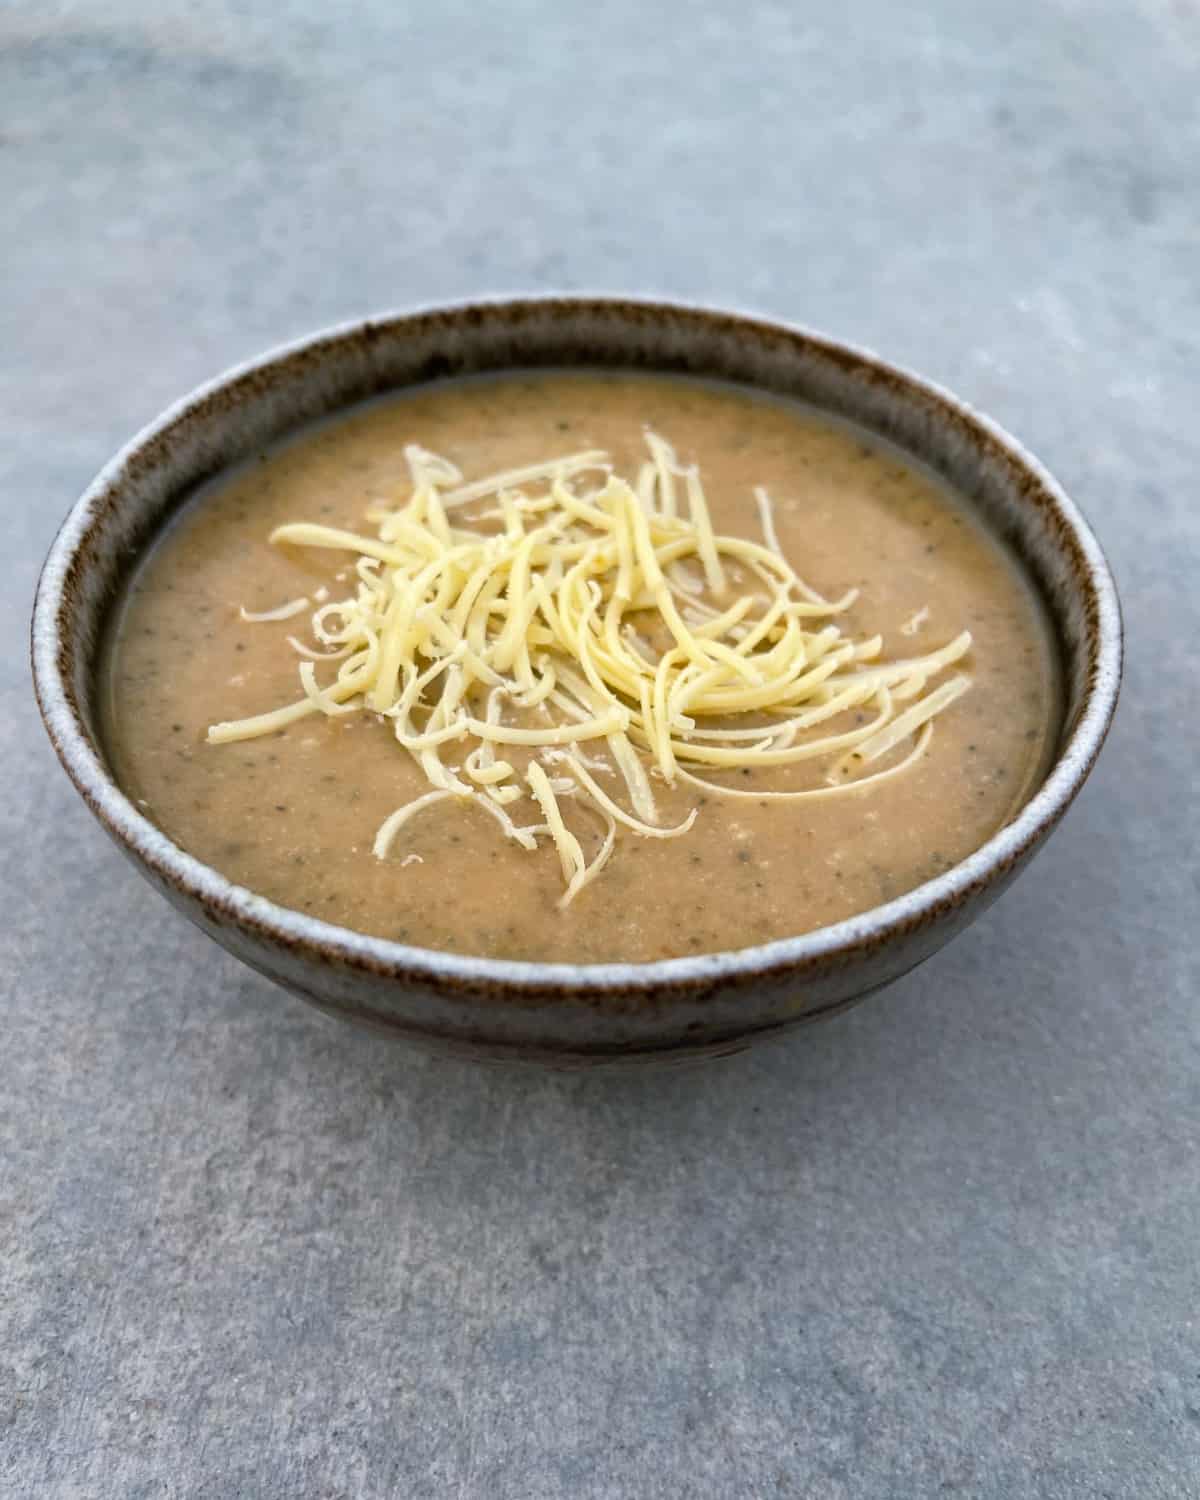 Instant pot broccoli cheddar soup in ceramic bowl topped with shredded cheese.